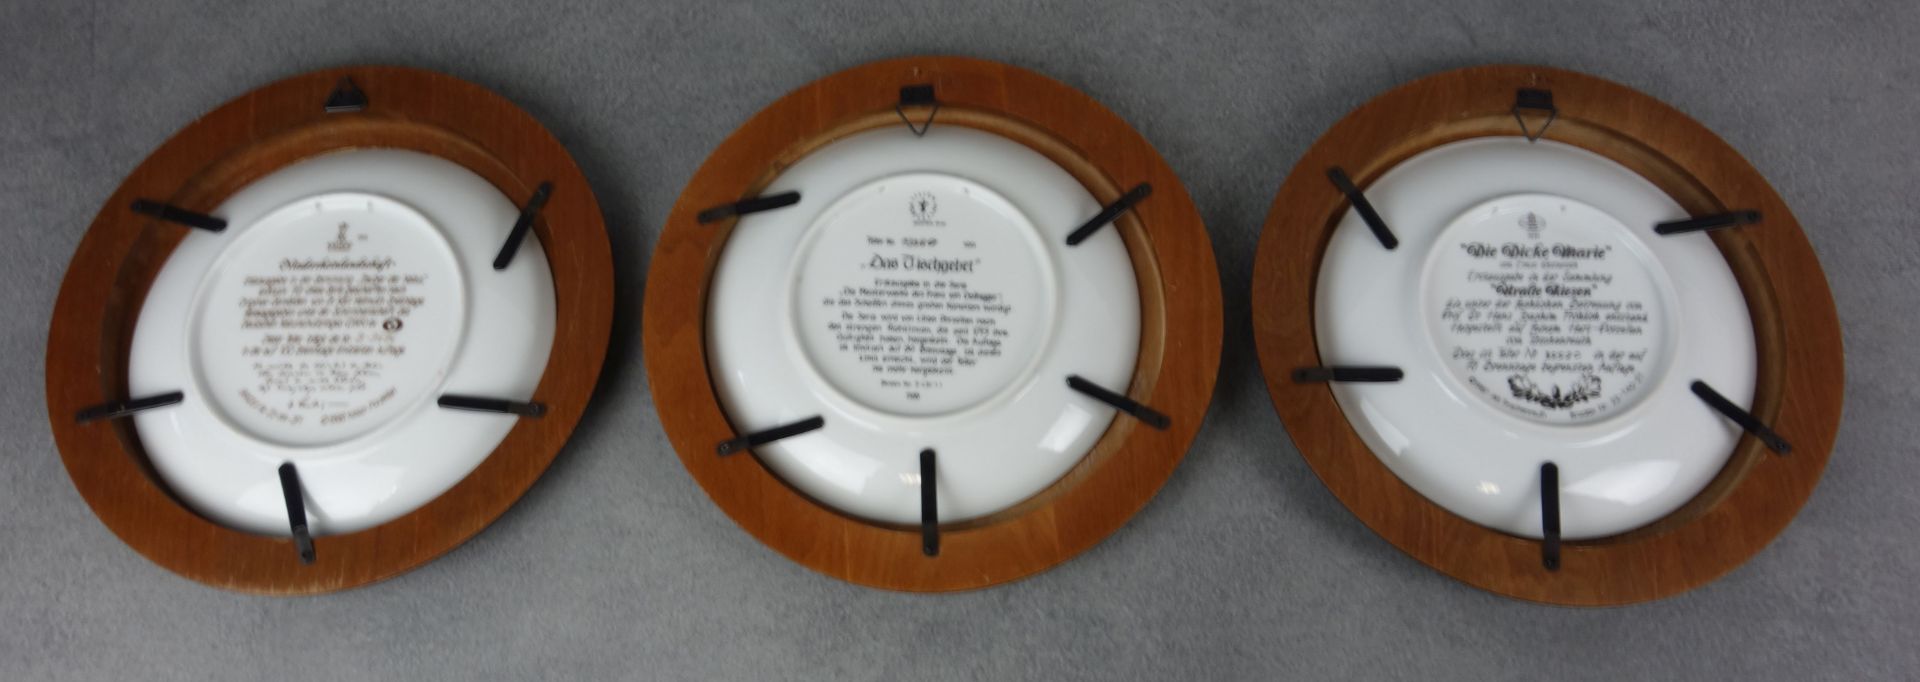 3 WALL PLATES - Image 2 of 2